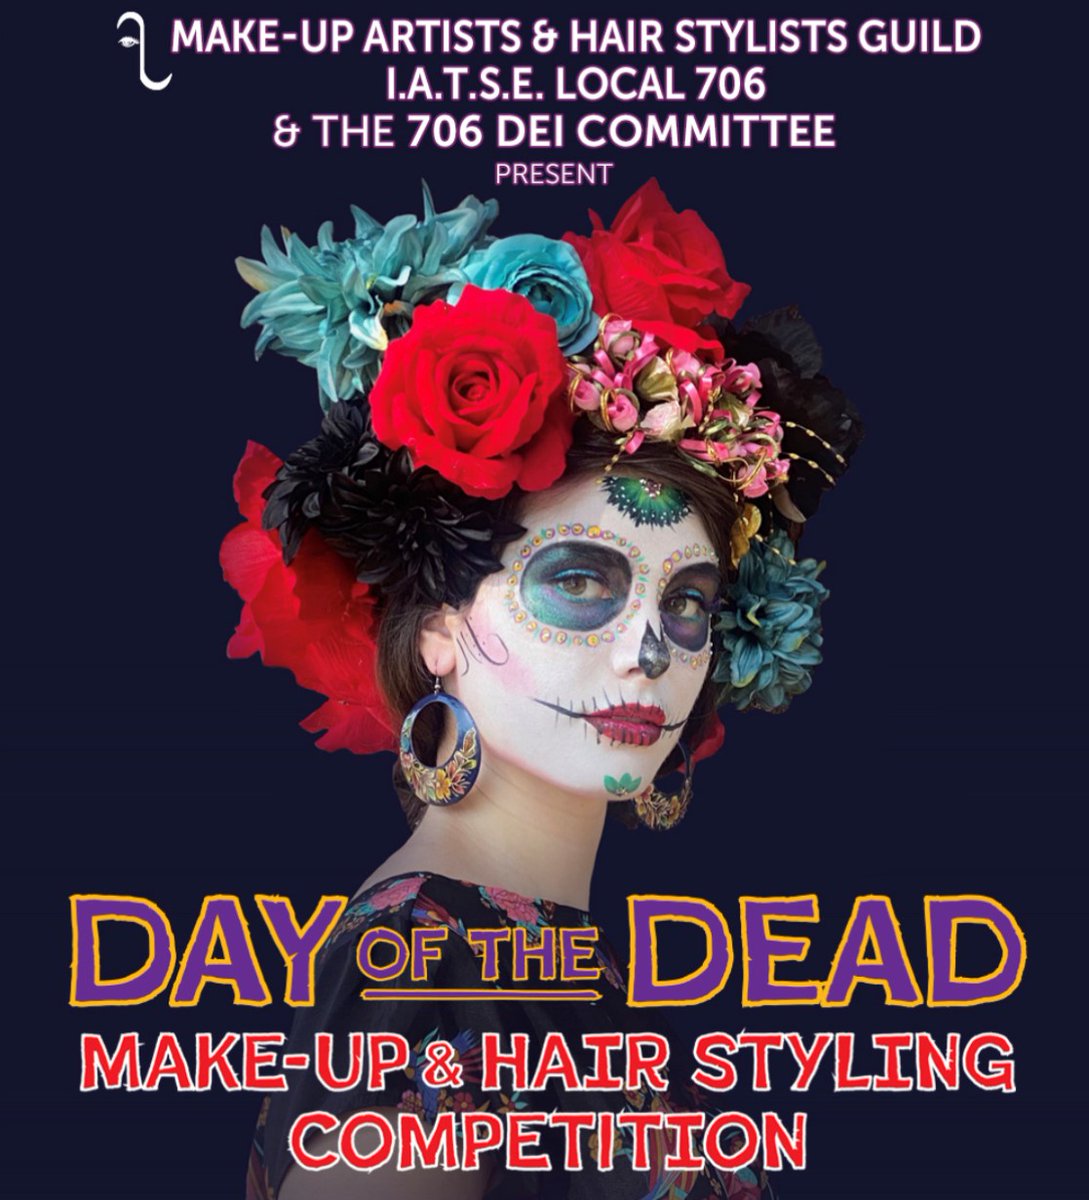 VOTING IS OPEN in the @IATSELocal706 #DayOfTheDead #hair & #makeup Competition! We’re proud of the #Canadian representation, with entrants from @Iatselocal212, @IATSE856, @iatse873, & @IATSE891. Check out all entries & VOTE FOR A VIDEO BY CLICKING “LIKE”: tinyurl.com/3zvps9kr